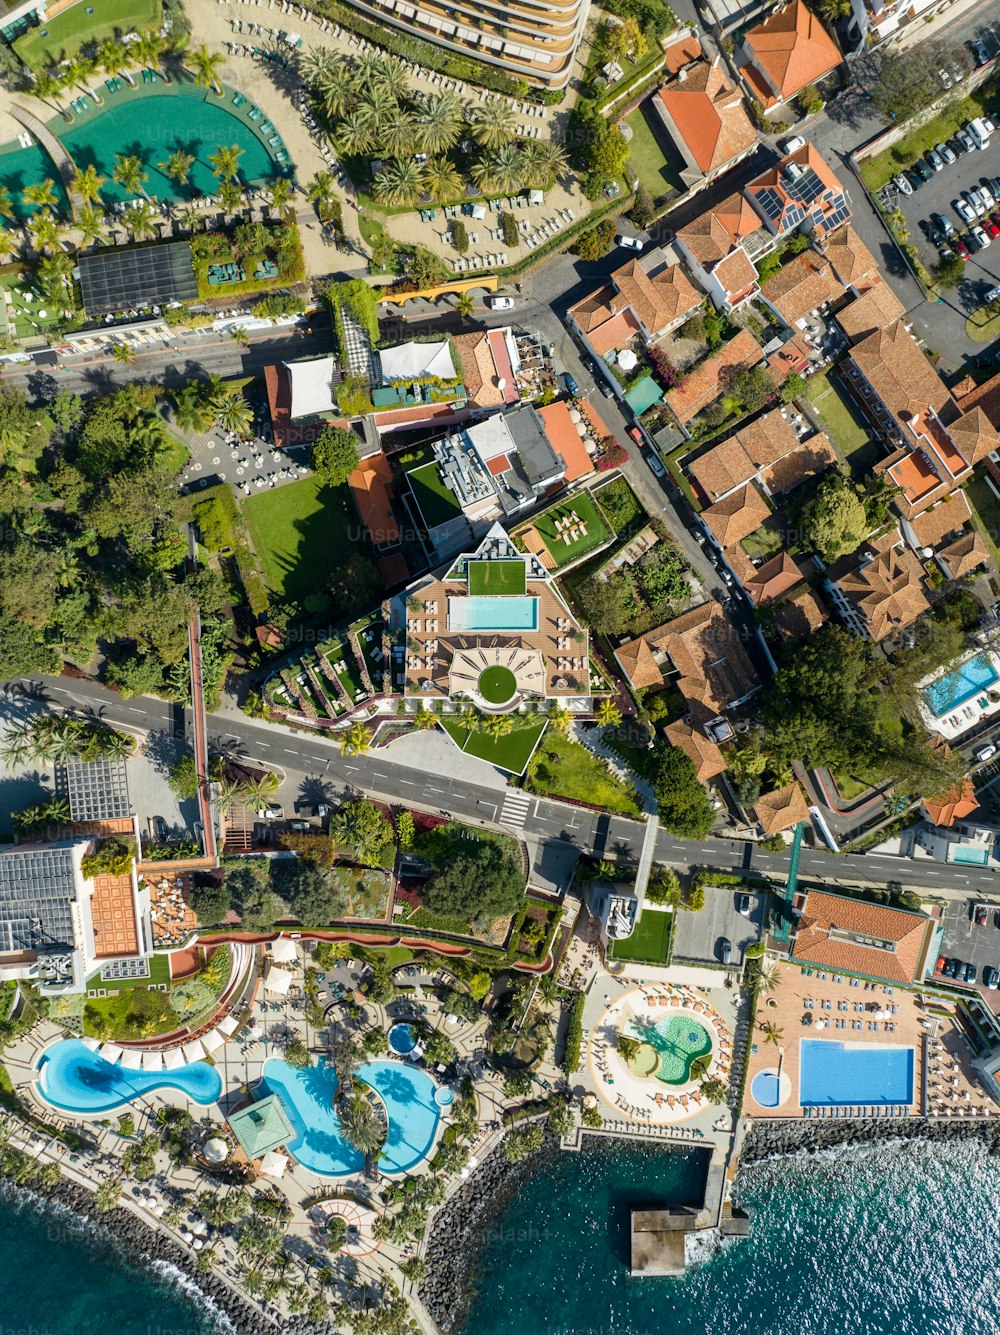 An aerial view of a luxury resort and beach in Funchal, Madeira Island, Portugal